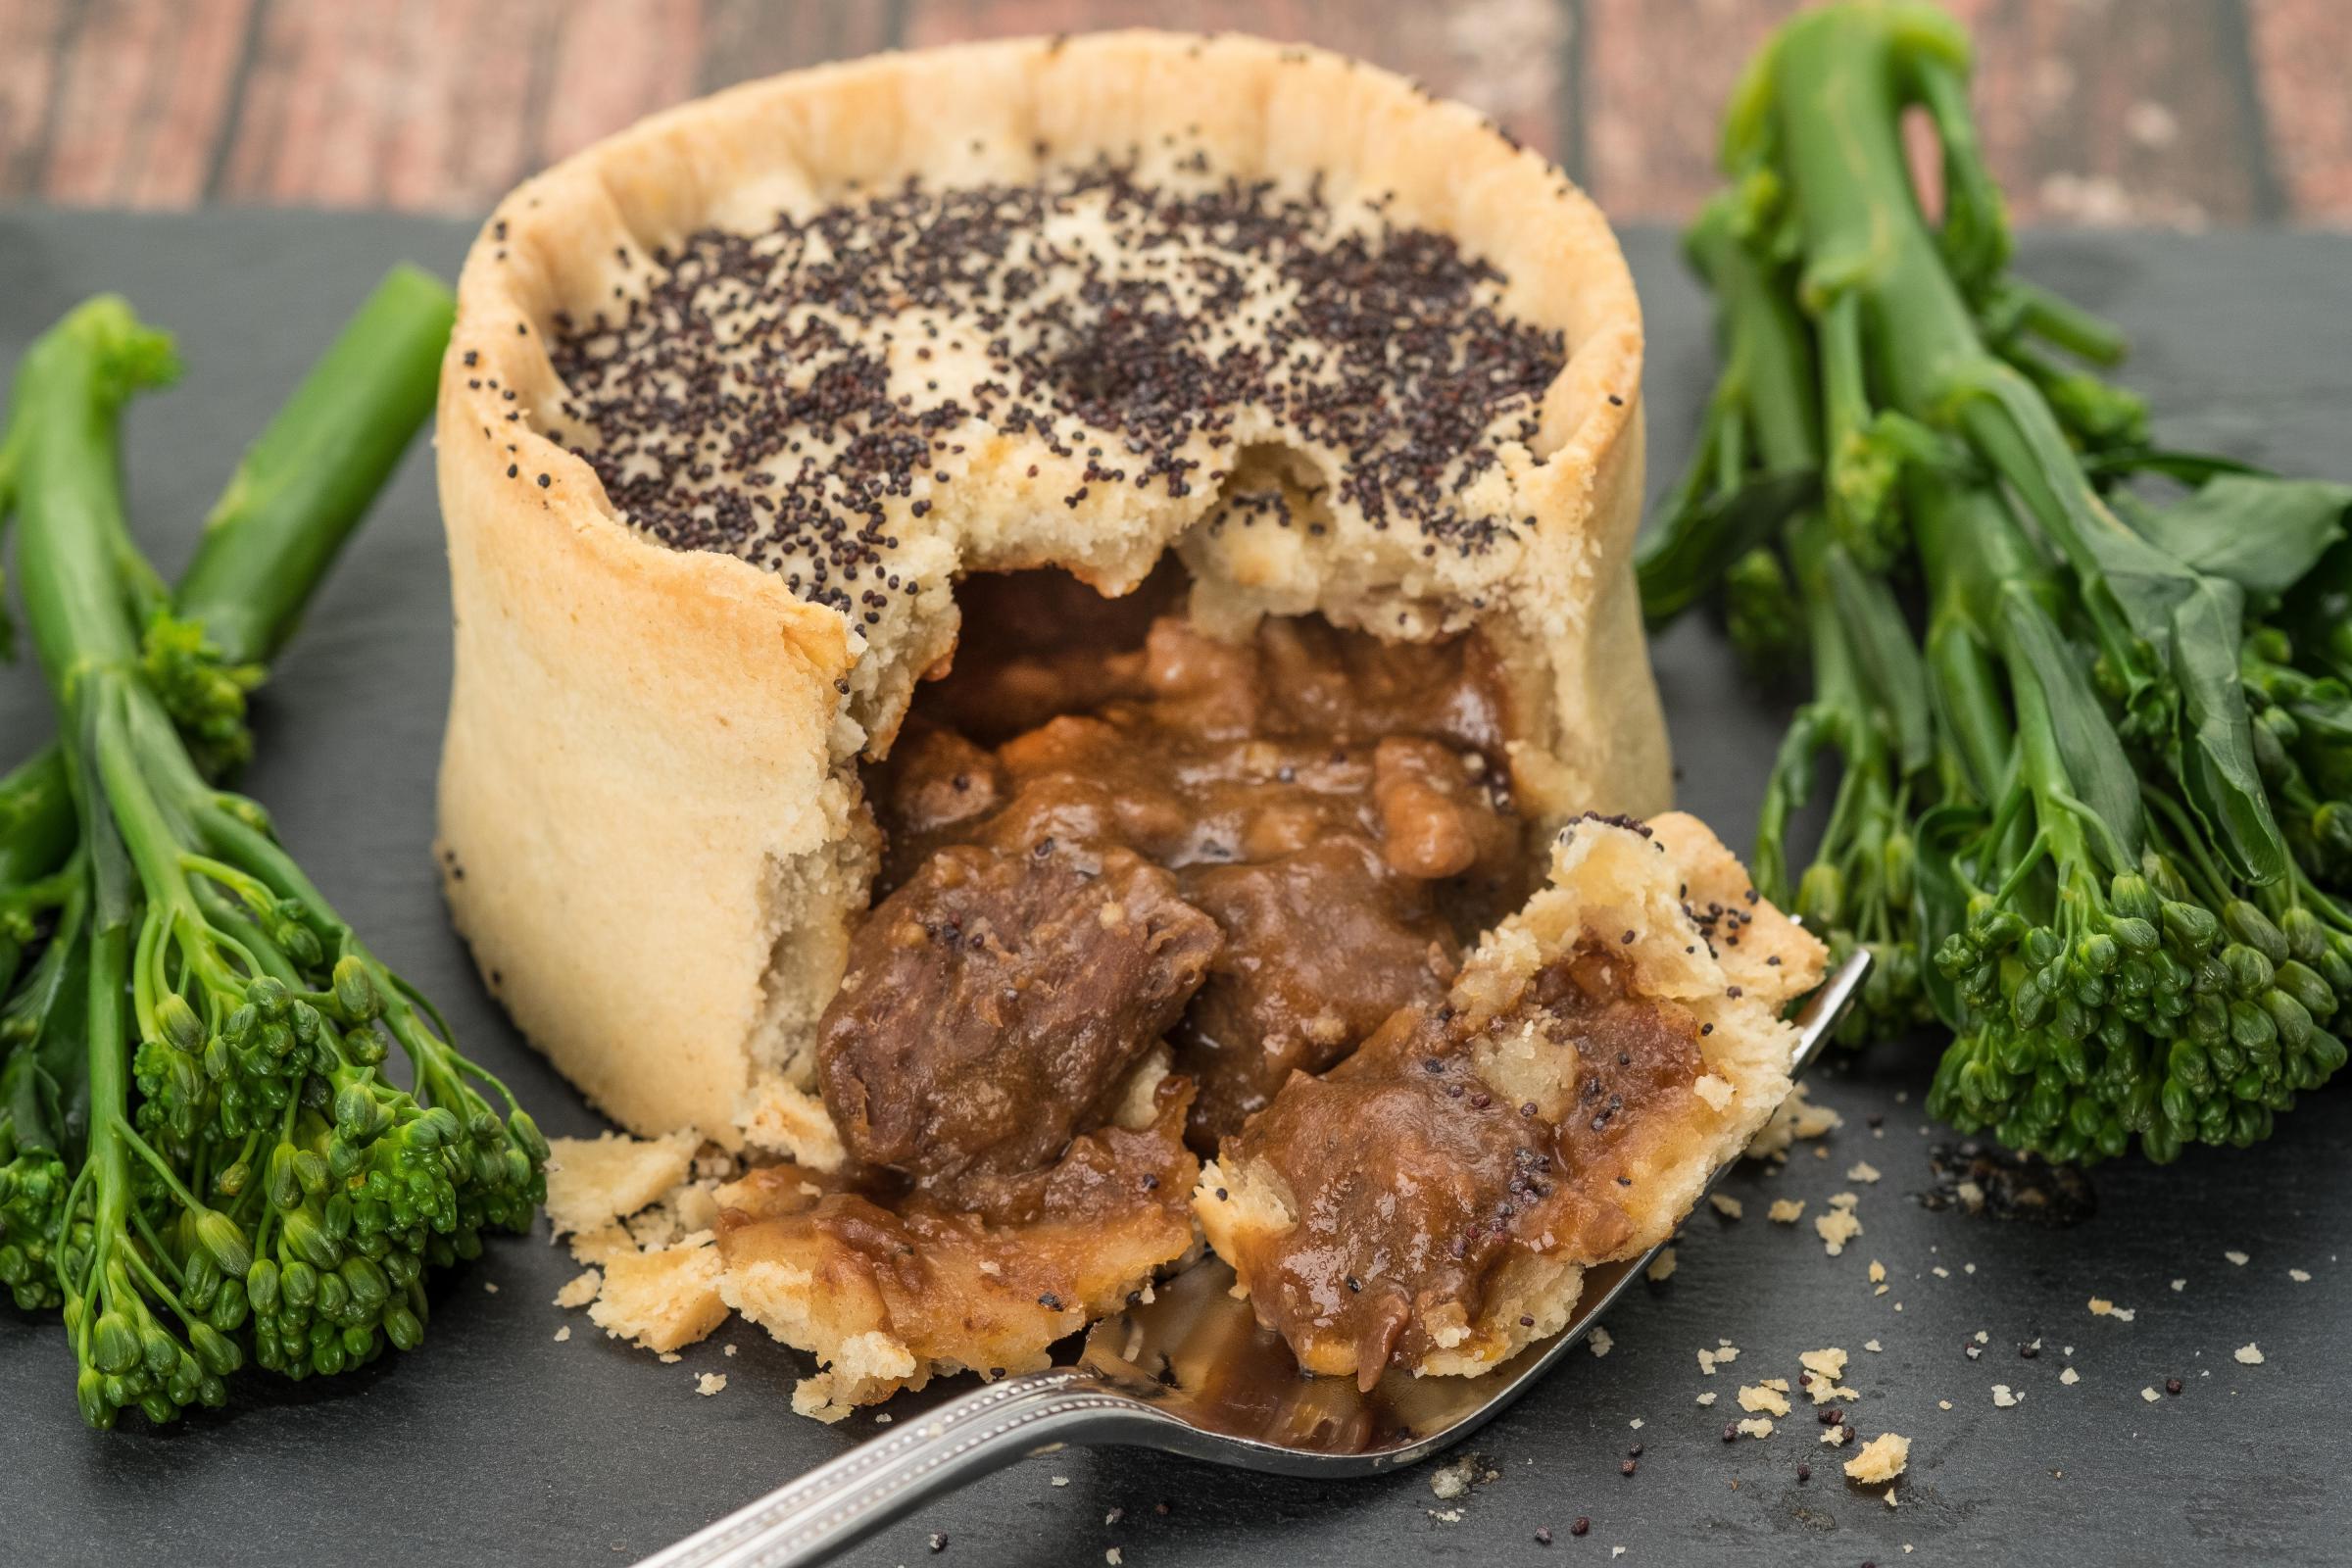 Turners Pies bakers in Chichester has best steak and kidney pie in UK